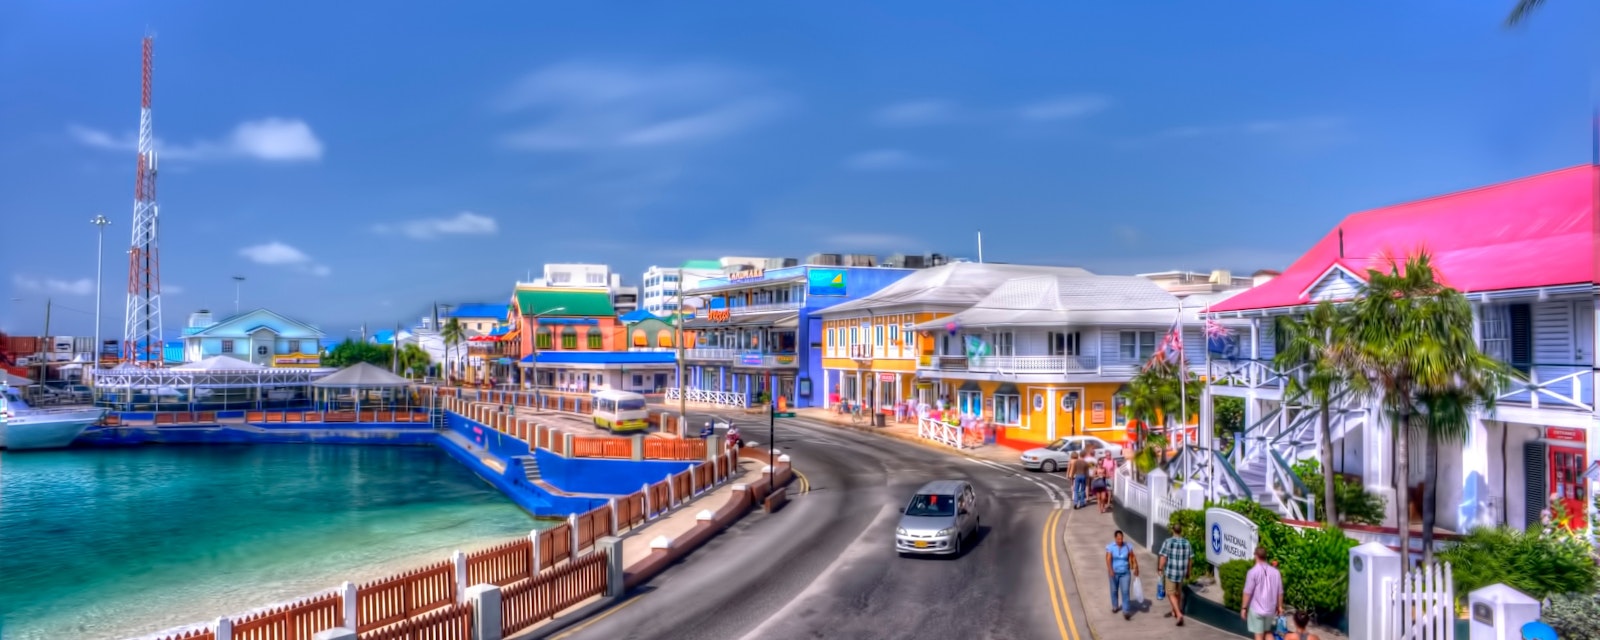 Gerge,Town,-,The,Cayman,Islands,Were,Ranked,As,The